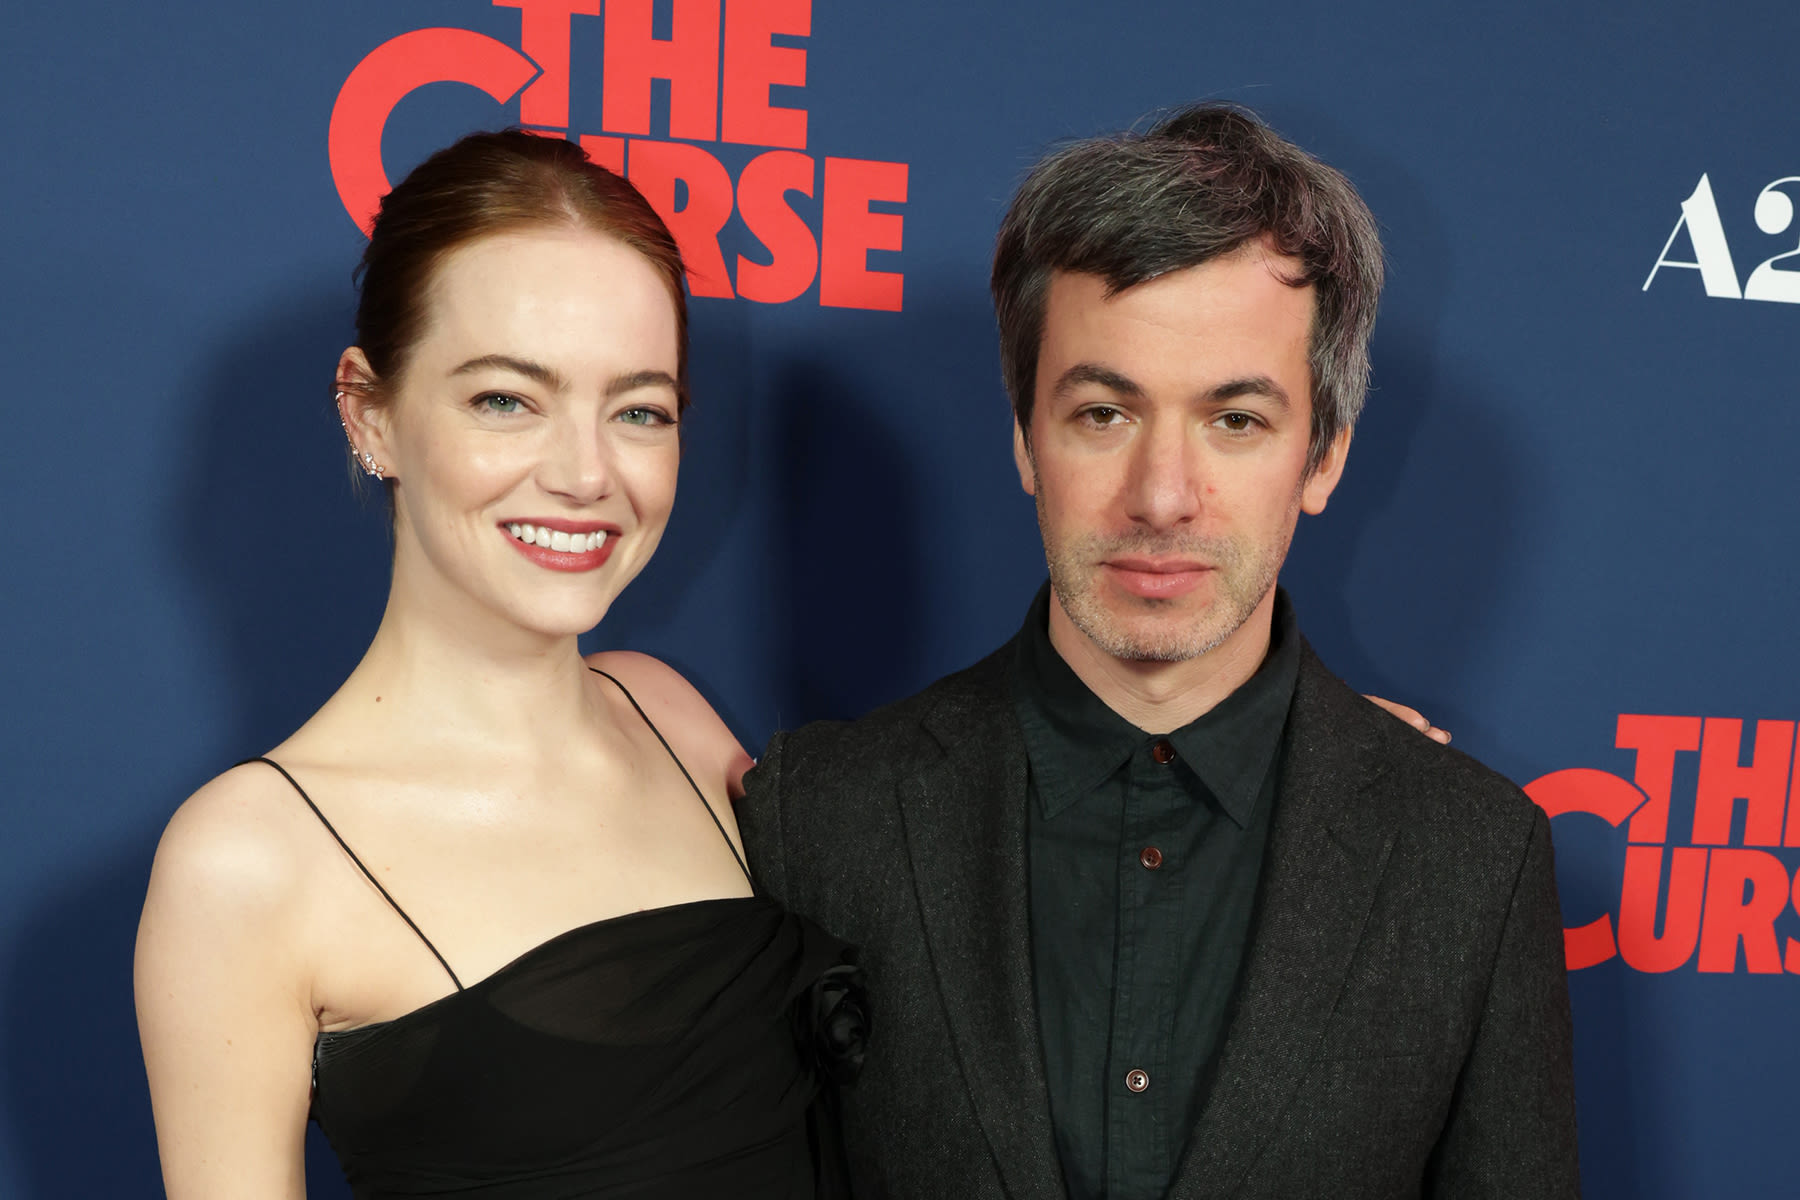 Emma Stone and Nathan Fielder Reuniting for Chess Cheating Scandal Film